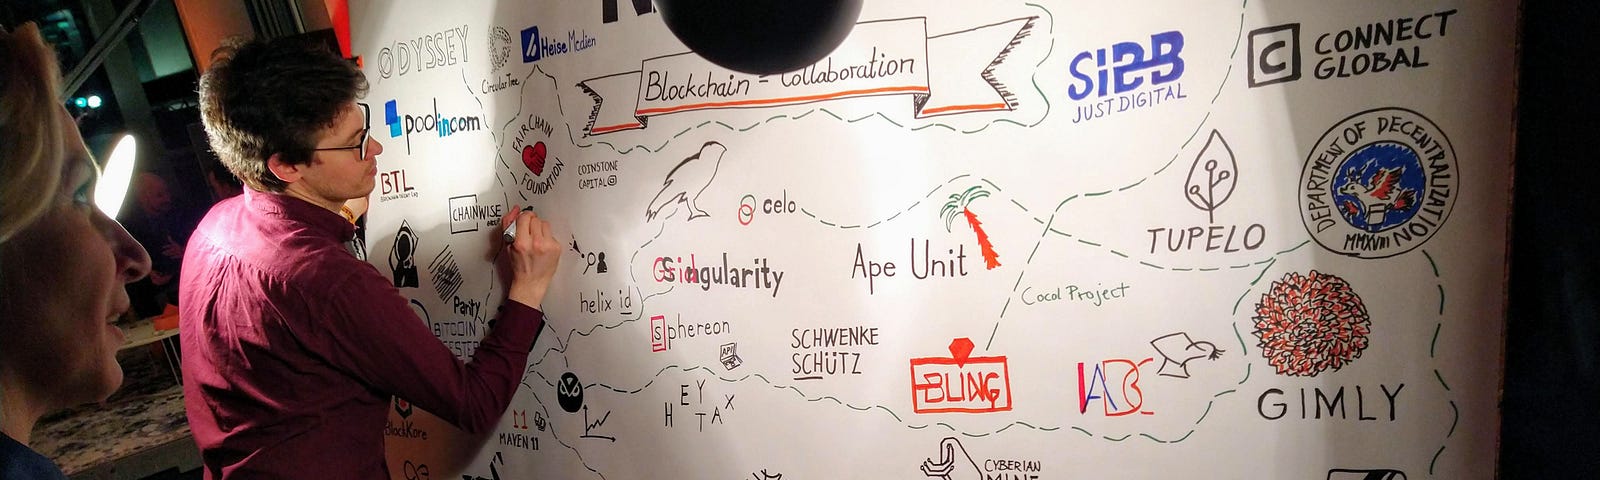 Dutch and German blockchain ecosystem, drawn by attendees of the BerChain New Year’s Reception 2020 at Royal Netherlands Emba